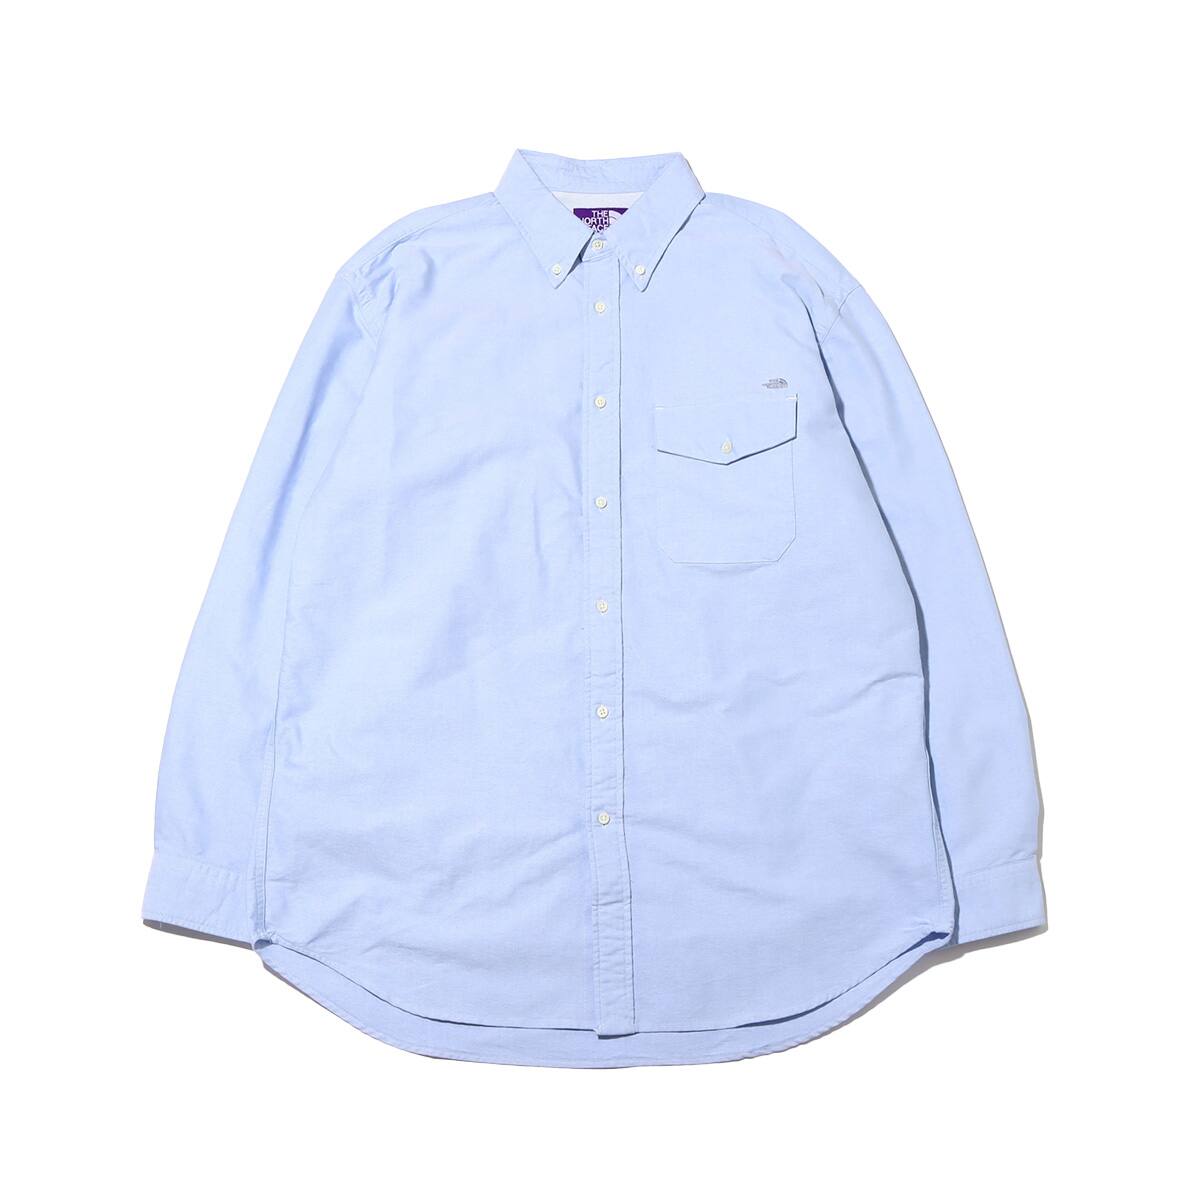 THE NORTH FACE PURPLE LABEL Cotton Polyester OX B.D. Shirt